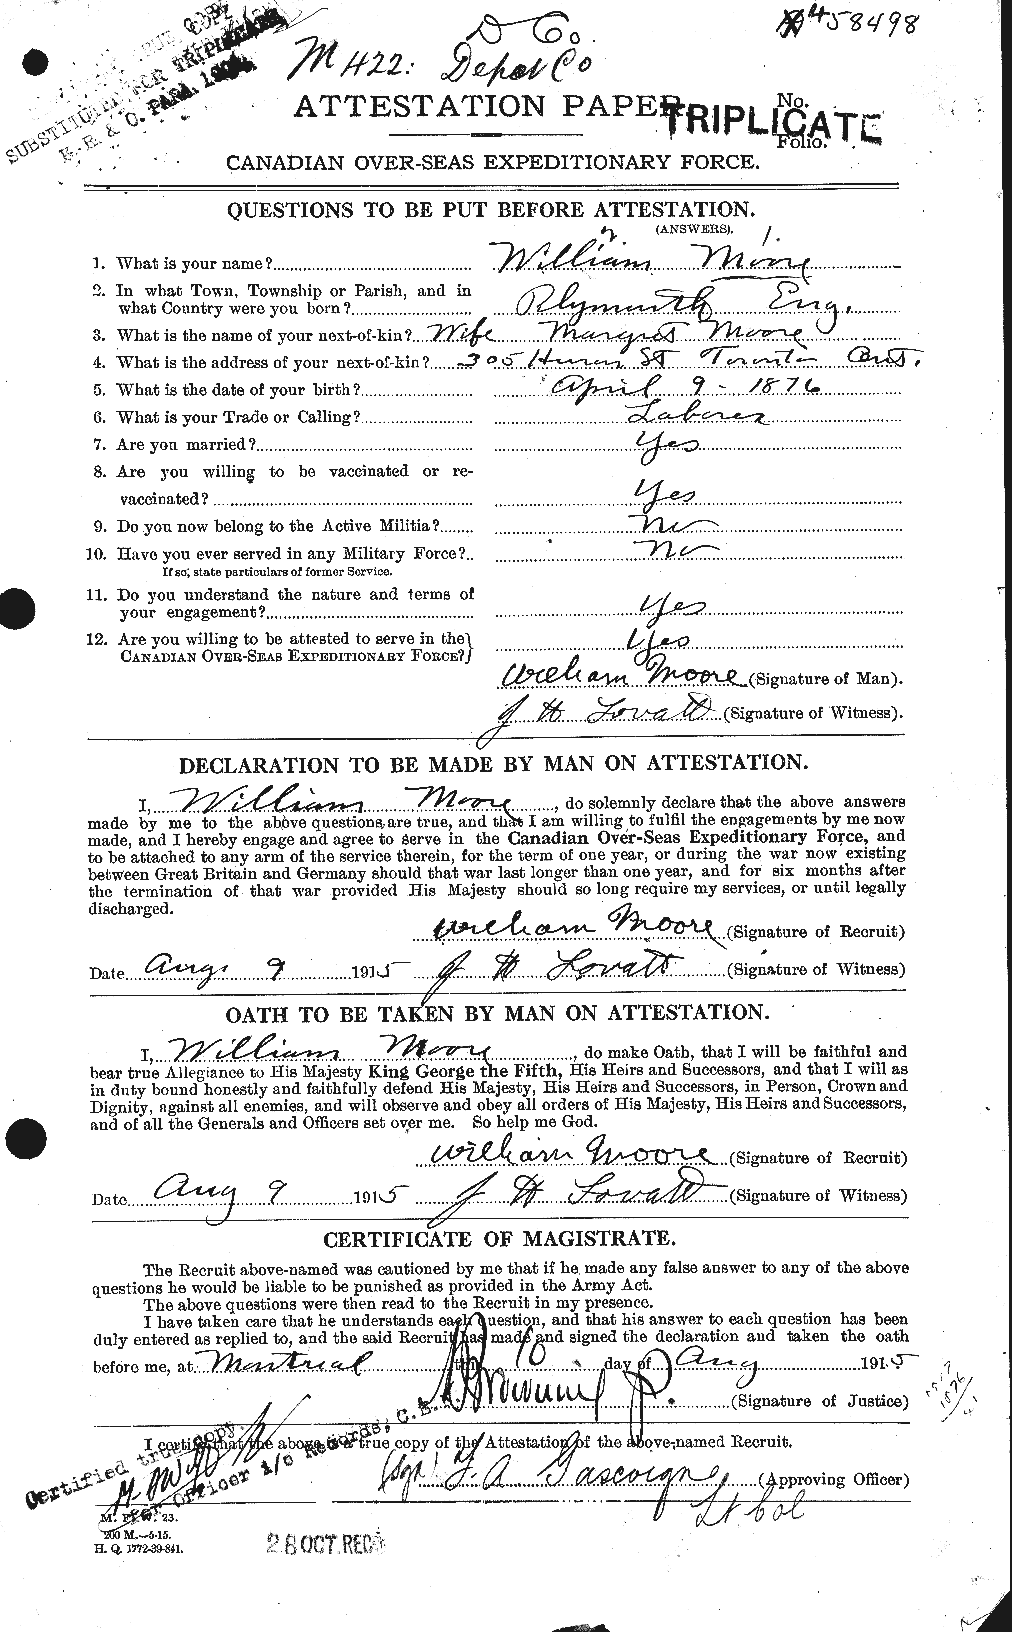 Personnel Records of the First World War - CEF 505753a